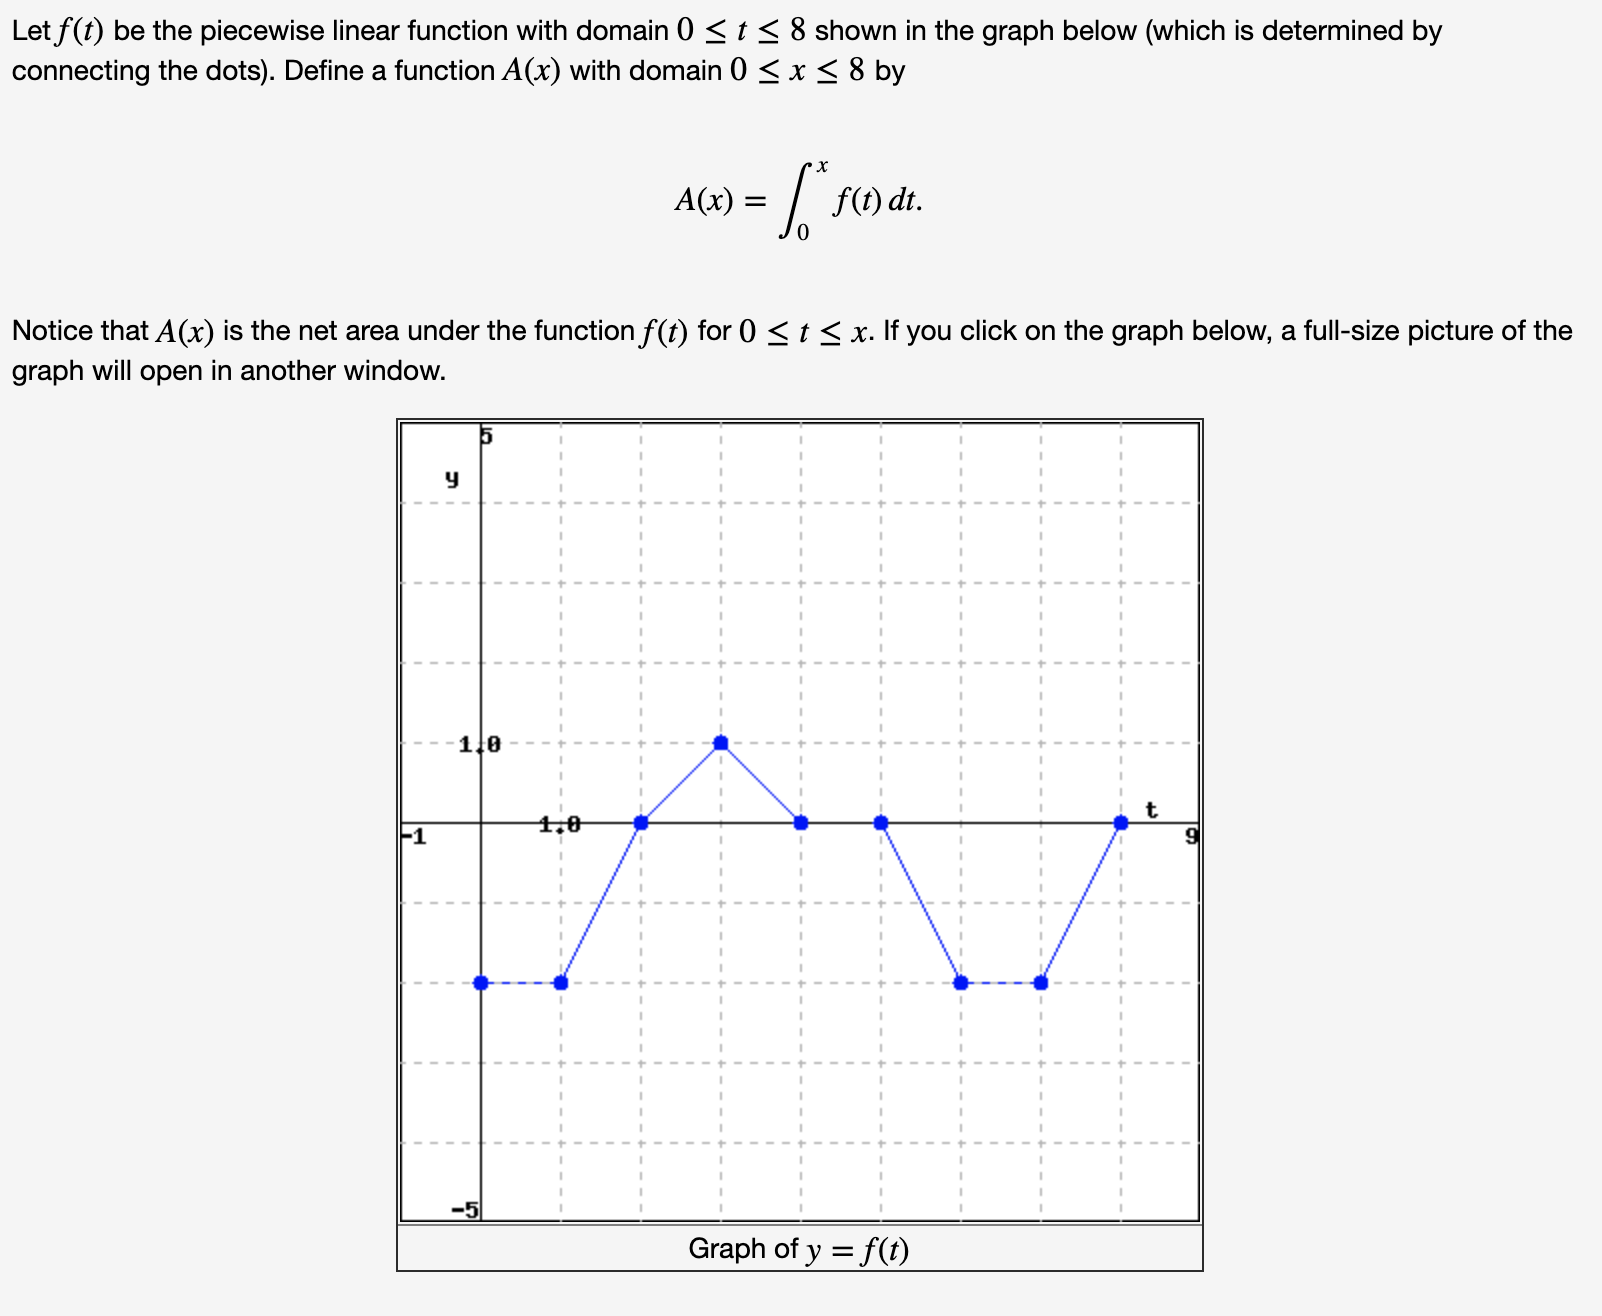 Let f(t) be the piecewise linear function with domain 0 <t < 8 shown in the graph below (which is determined by
connecting the dots). Define a function A(x) with domain 0 <x < 8 by
:| f(1) dt.
A(x)
Notice that A(x) is the net area under the function f(t) for 0 < t < x. If you click on the graph below, a full-size picture of the
graph will open in another window.
1.0
4,0
F1
-5
Graph of y = f(t)
